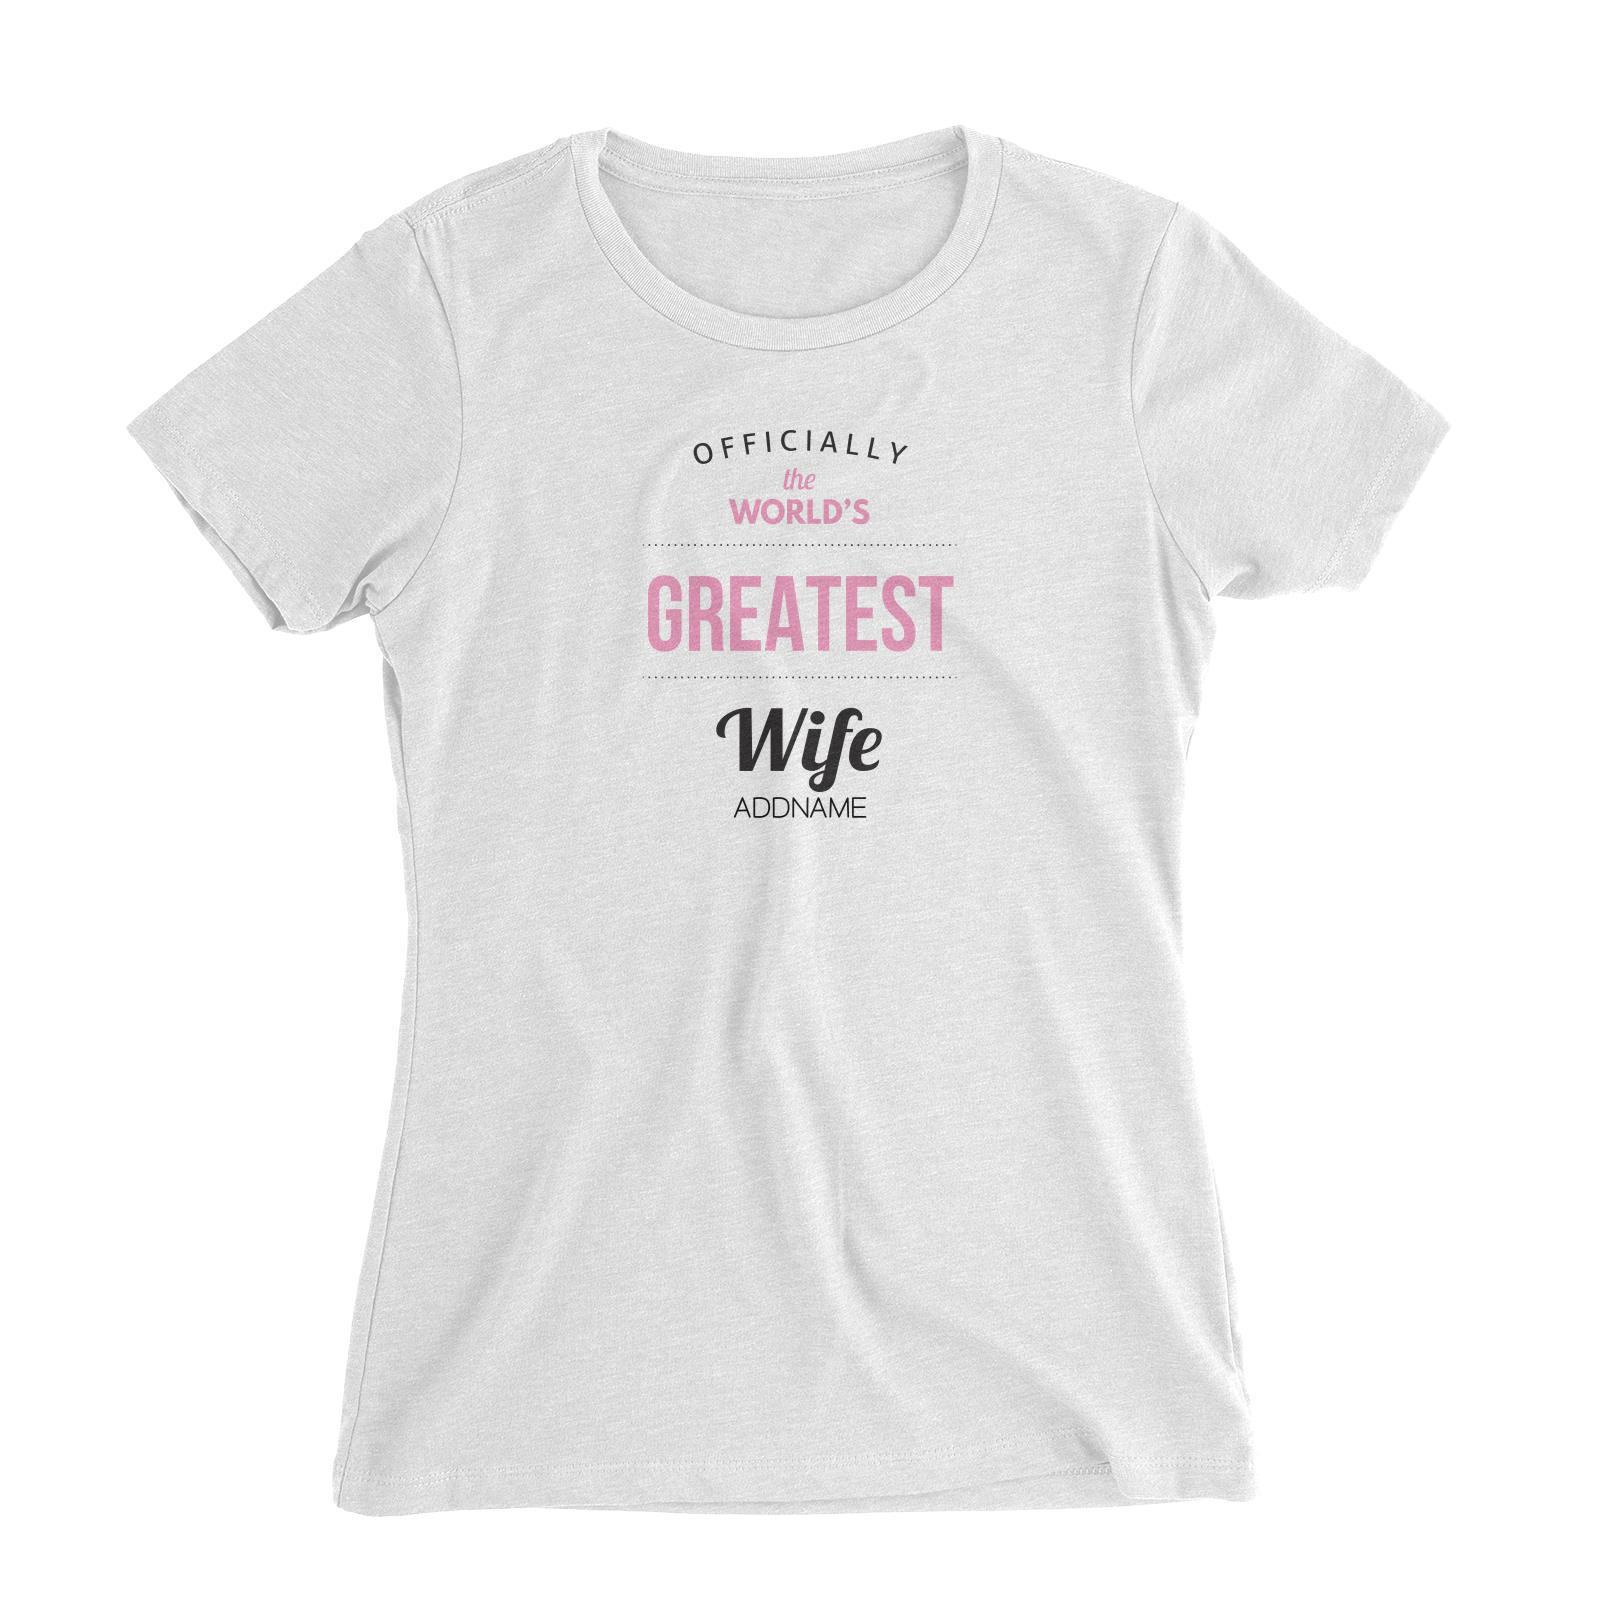 Husband and Wife Officially The World's Geatest Wife Addname Women Slim Fit T-Shirt